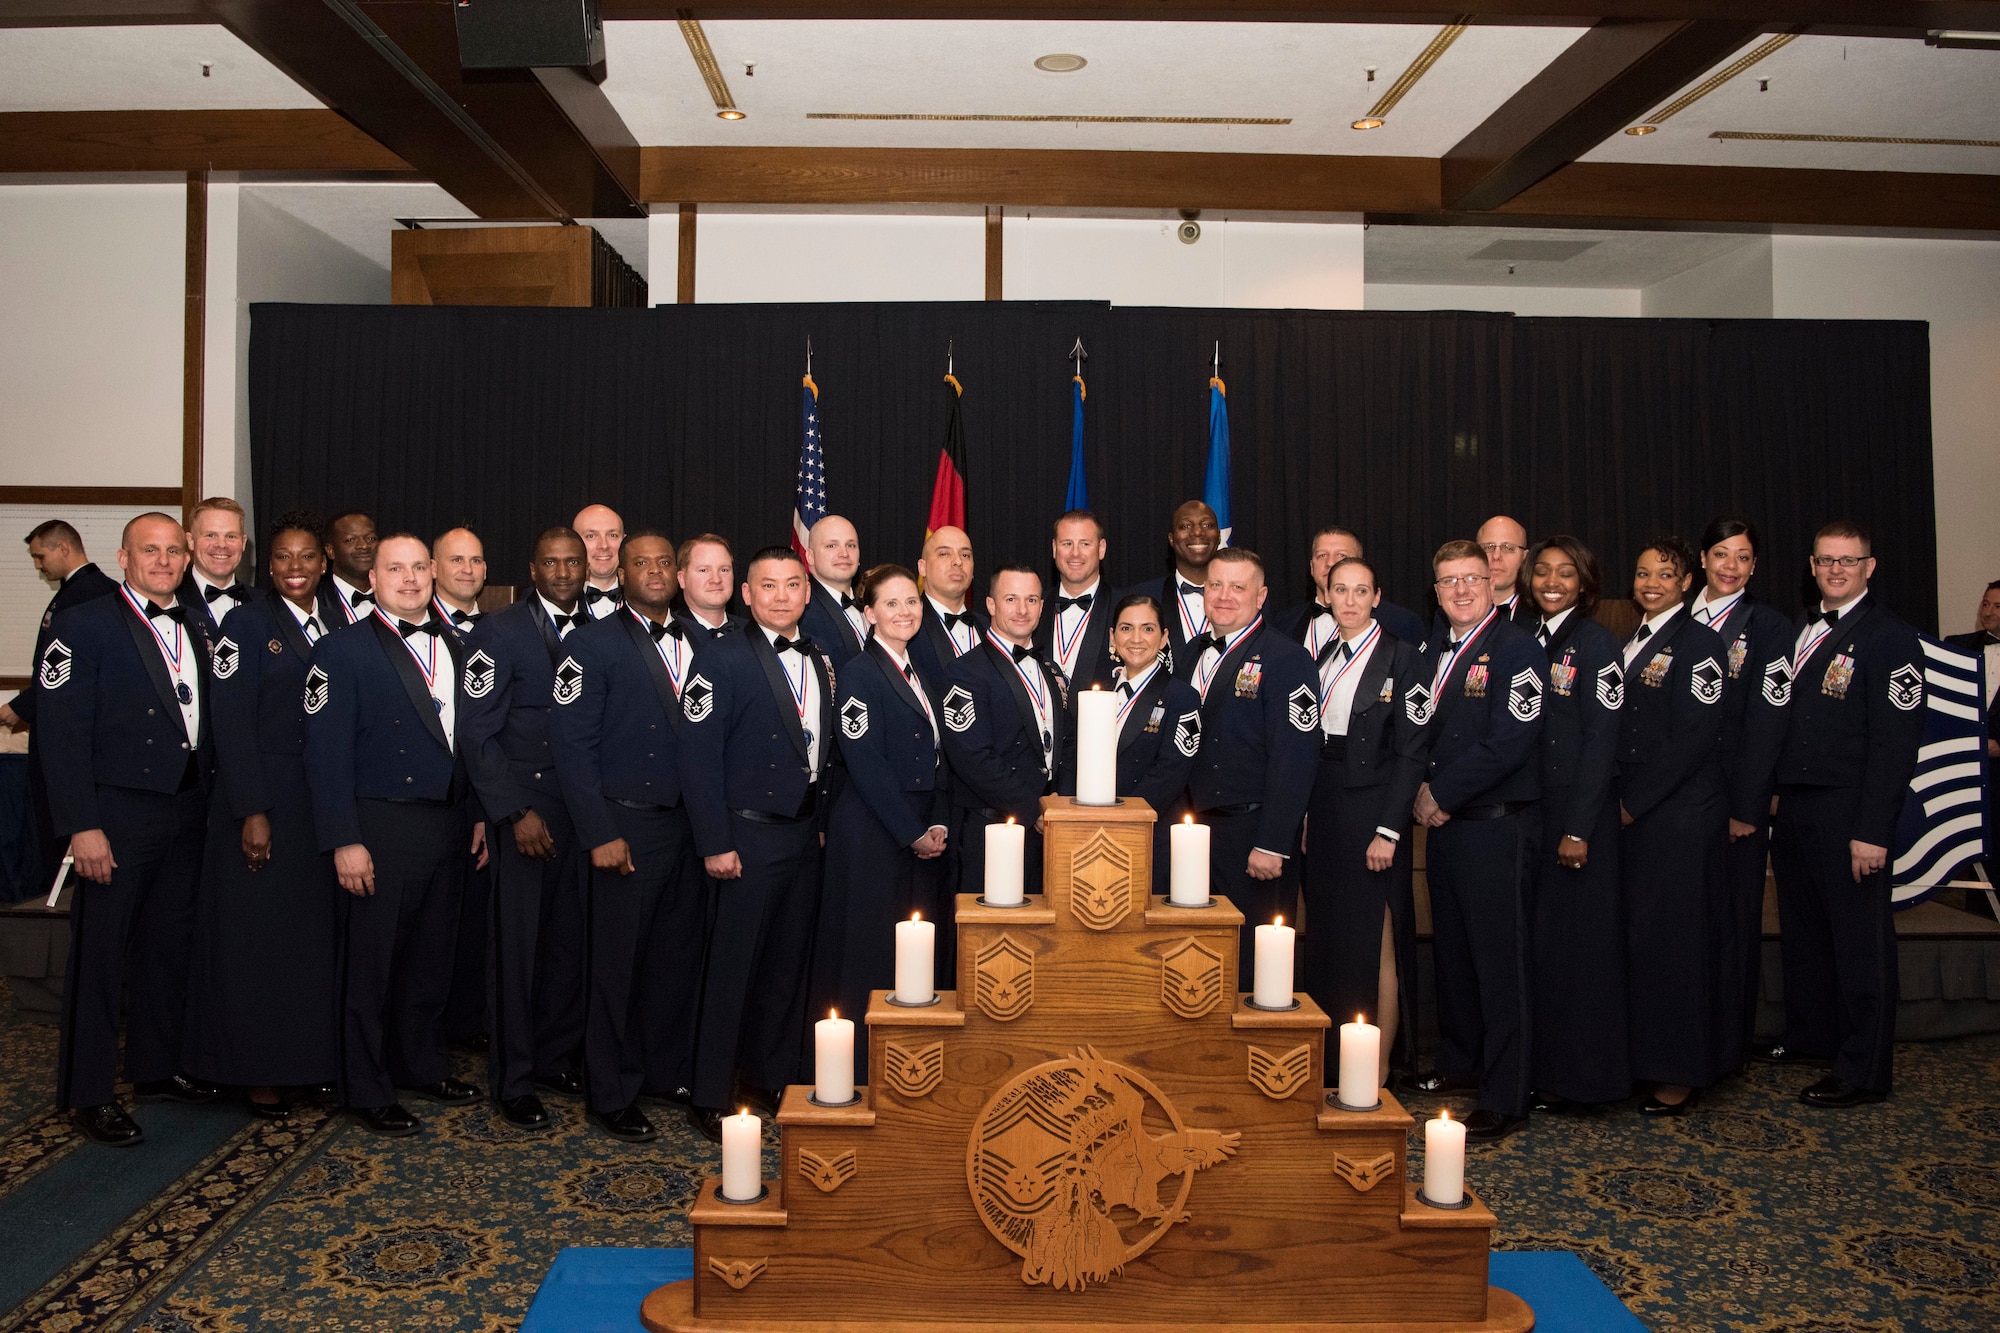 The Kaiserslautern Military Community’s 27 new chief master sergeant selectees pose for a photo during the Chief Recognition Ceremony on Ramstein Air Base, March 23, 2019. The Chief Recognition Ceremony is an event that highlights the newest chief master sergeant-selects’ accomplishments and acknowledges their ability to attain a position within the top one percent of the U.S. Air Force enlisted force. (U.S. Air Force photo by Airman 1st Class Kristof J. Rixmann)